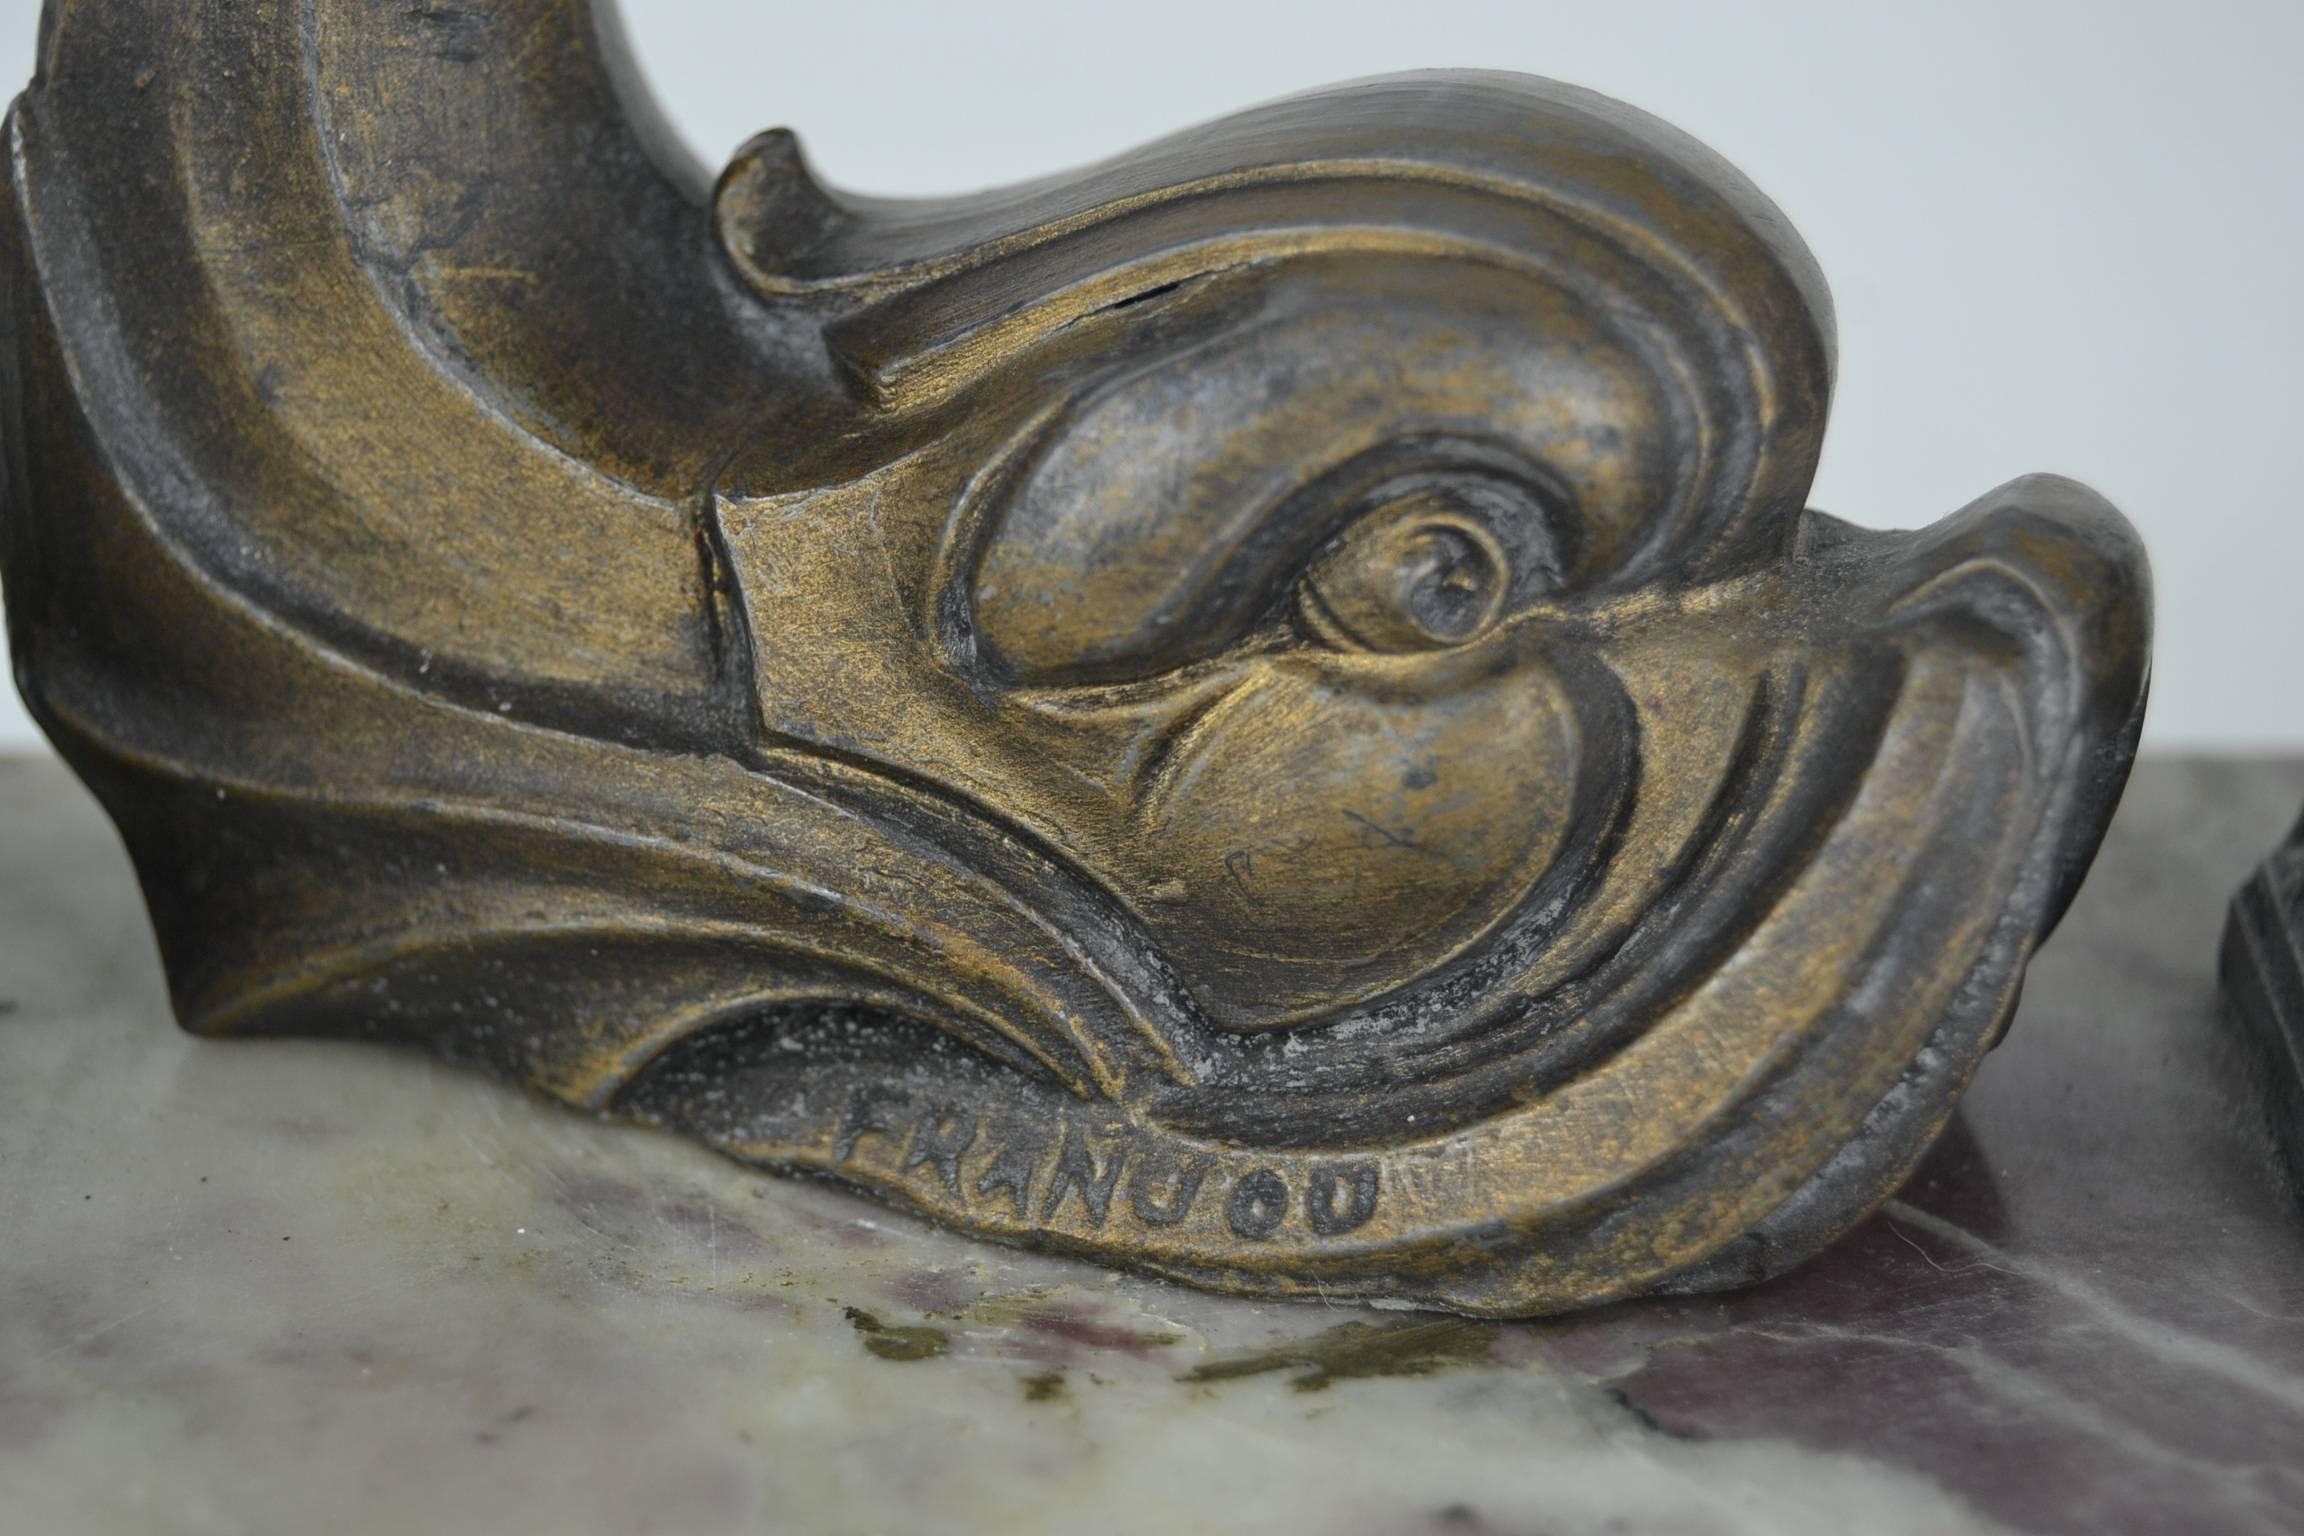 Elegant Art Deco inkwell, desk set, desk ornament, desk accessory.
Bronze patinated metal dolphin fish and two ink bottles - ink reservoir on venous marble base.
Signed: Franjou.
France
circa 1925-1930.

No glass inkwells in the Ink